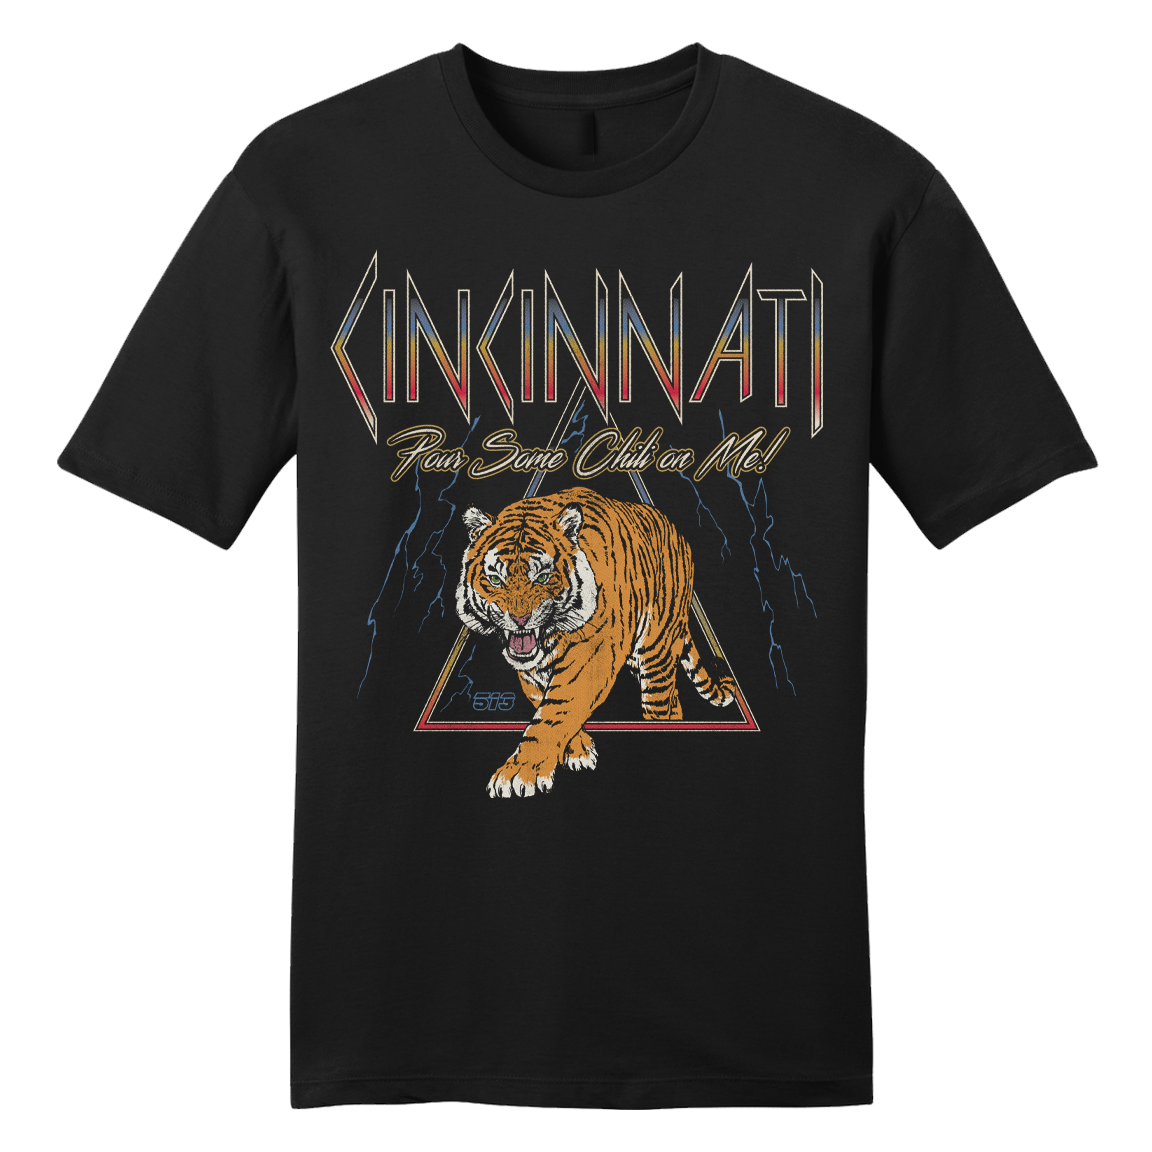 Def Tiger - Pour Some Chili on Me - Cincy Shirts